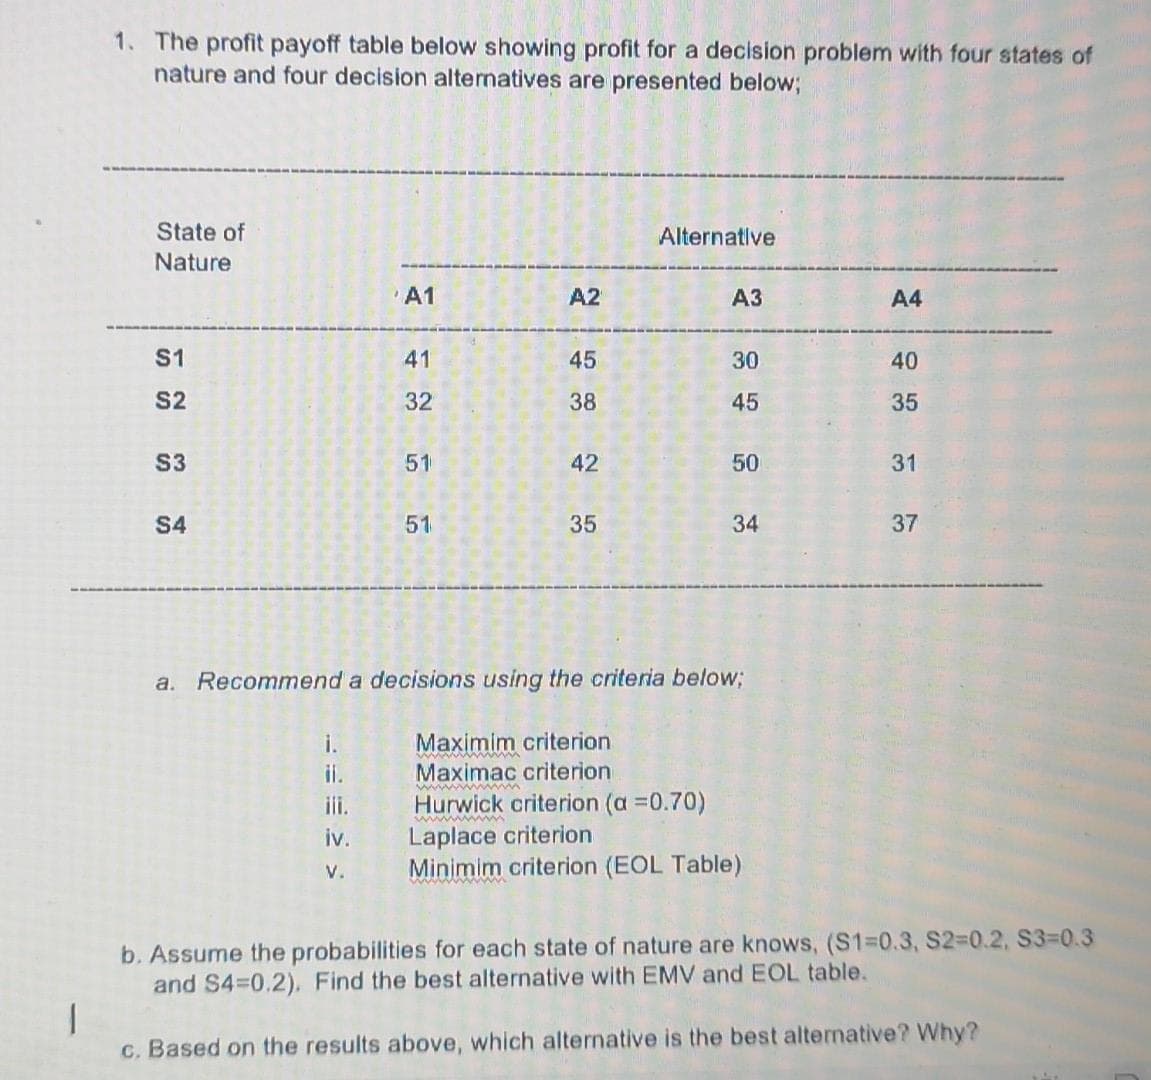 1. The profit payoff table below showing profit for a decision problem with four states of
nature and four decision alternatives are presented below;
State of
Alternative
Nature
A1
A2
A3
A4
S1
41
45
30
40
S2
32
38
45
35
S3
51
42
50
31
S4
51
35
34
37
a.
Recommend a decisions using the criteria below;
i.
Maximim criterion
ii.
Maximac criterion
ww
Hurwick criterion (a =0.70)
Laplace criterion
Minimim criterion (EOL Table)
ili.
iv.
V.
b. Assume the probabilities for each state of nature are knows, (S1-D0.3, S2-D0.2, S3-D0.3
and S4-0.2). Find the best alternative with EMV and EOL table.
c. Based on the results above, which alternative is the best alternative? Why?
